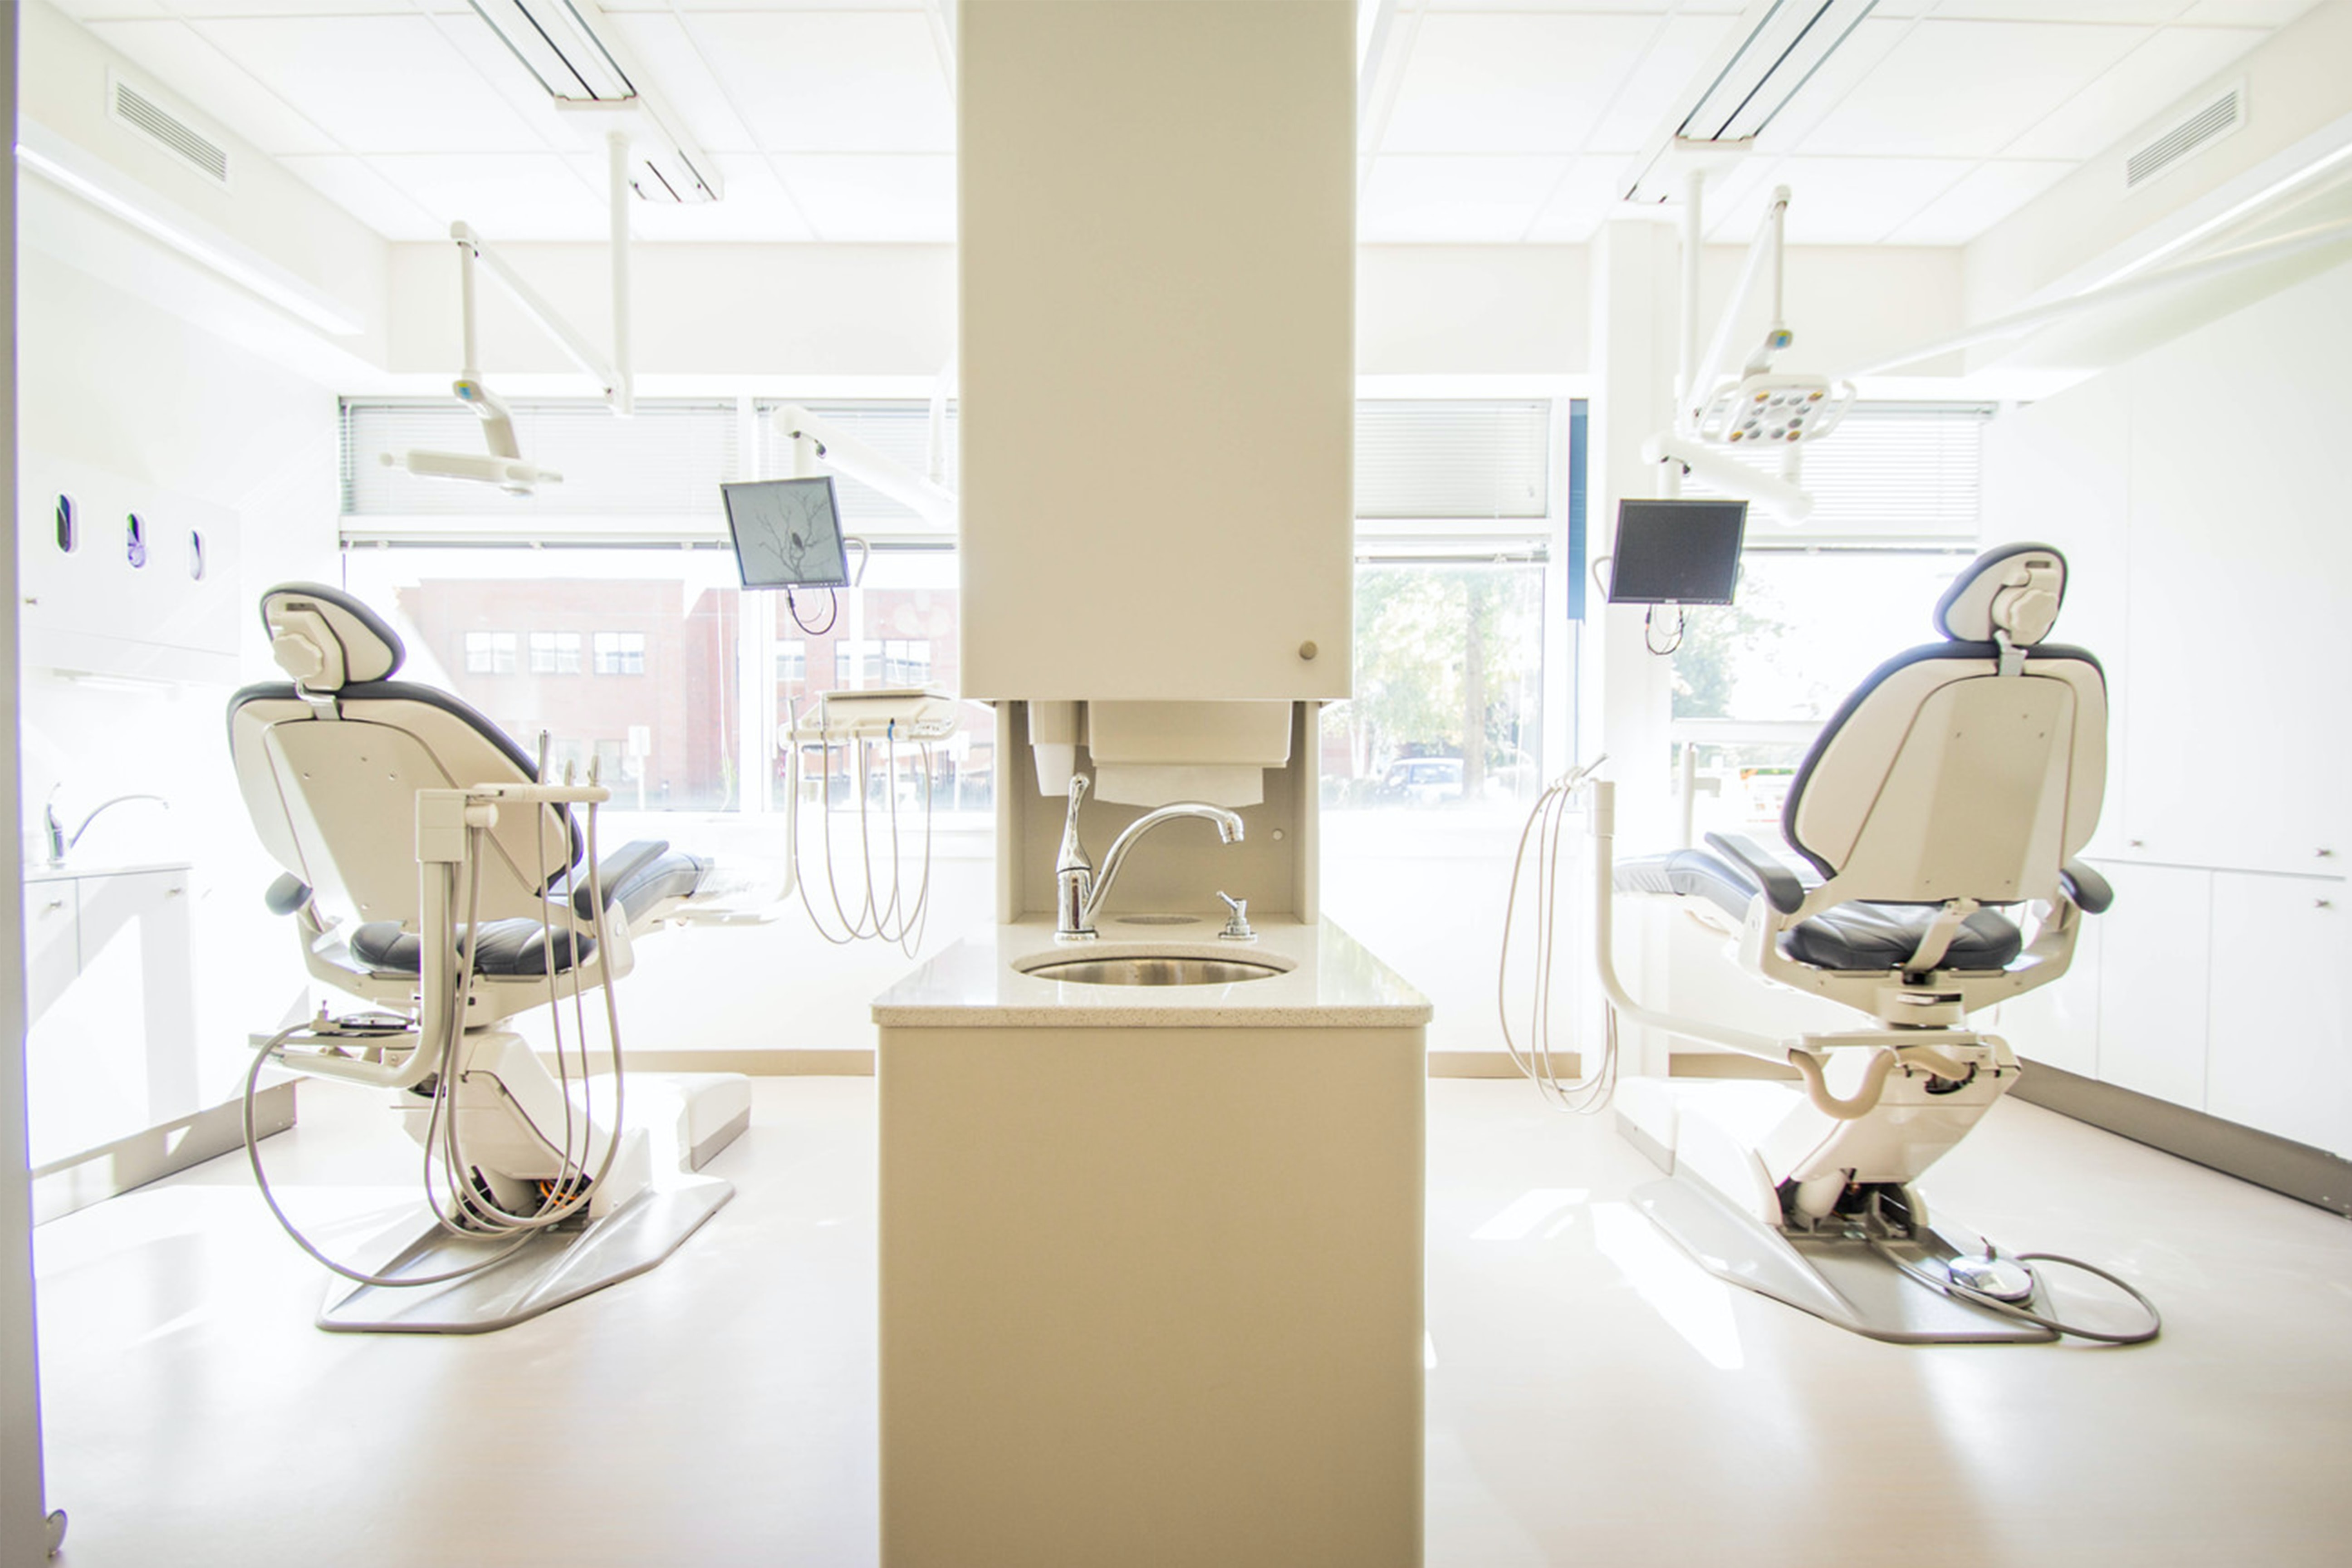 Dentist, Orthodontist, Periodontist… What’s the Difference?